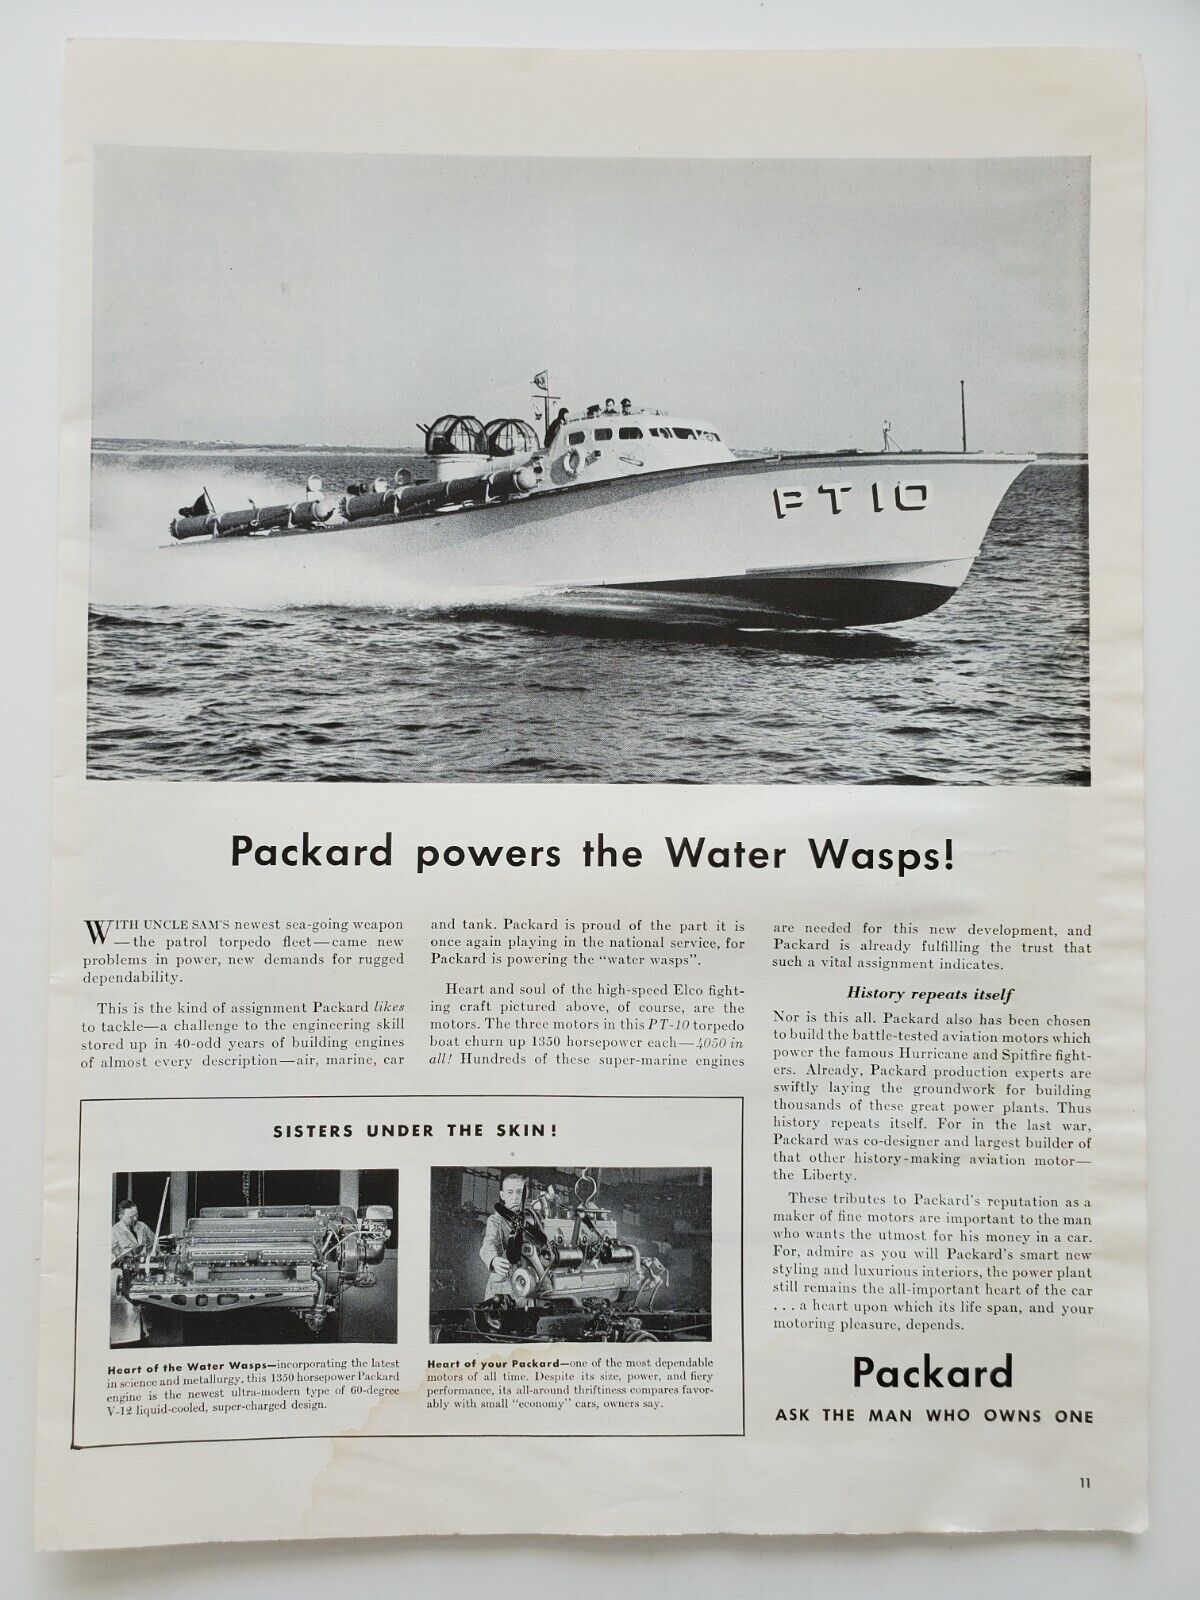 Packer Powered Water Wasp PT 10 Boat Water 1350 hp Engine 1941 Vintage Print Ad